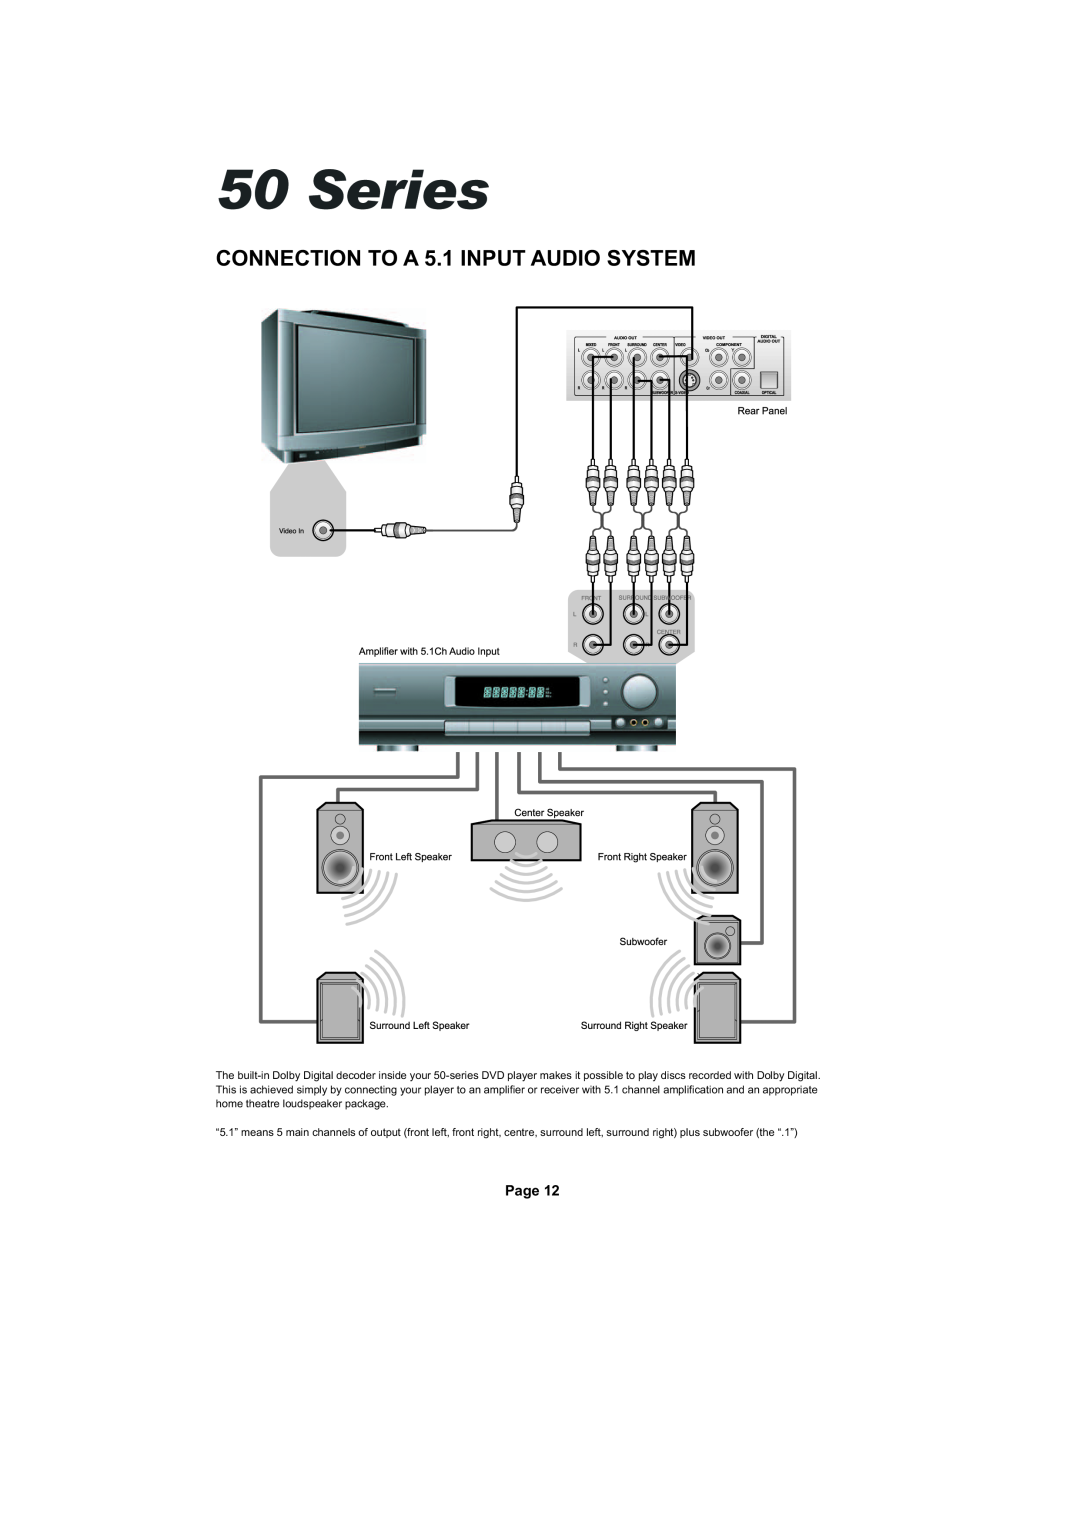 Cambridge Audio SERIES50 owner manual CONNECTION TO A 5.1 INPUT AUDIO SYSTEM, Series, Page 